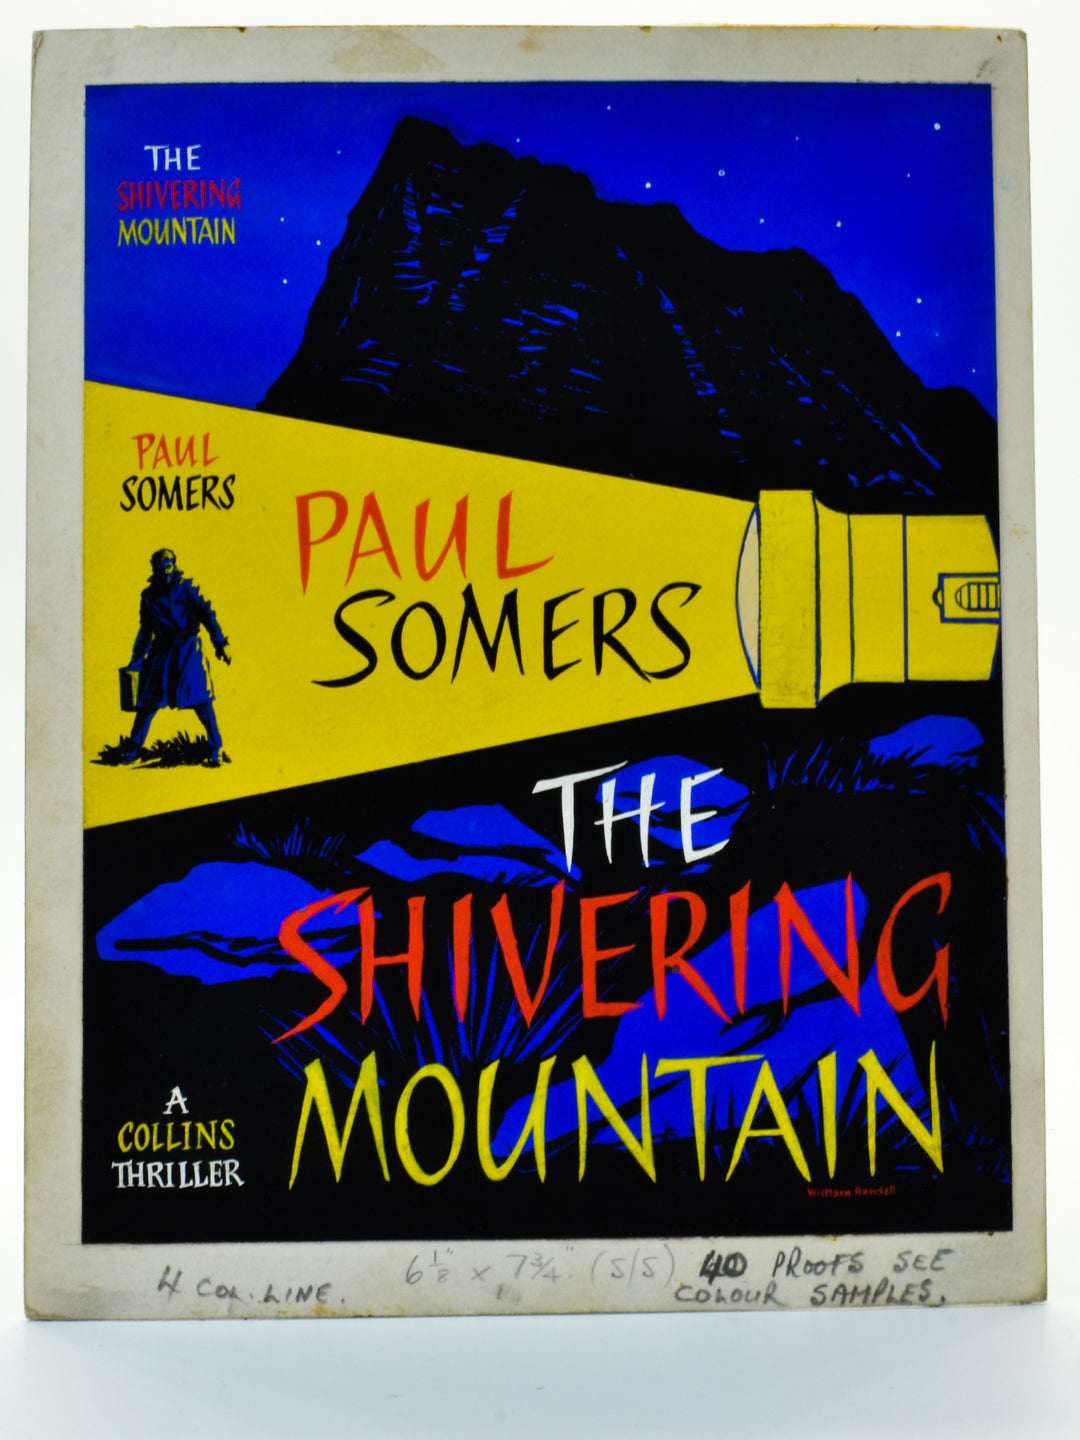 Somers, Paul - The Shivering Mountain ( Original Dustwrapper Artwork ) - SIGNED | back cover